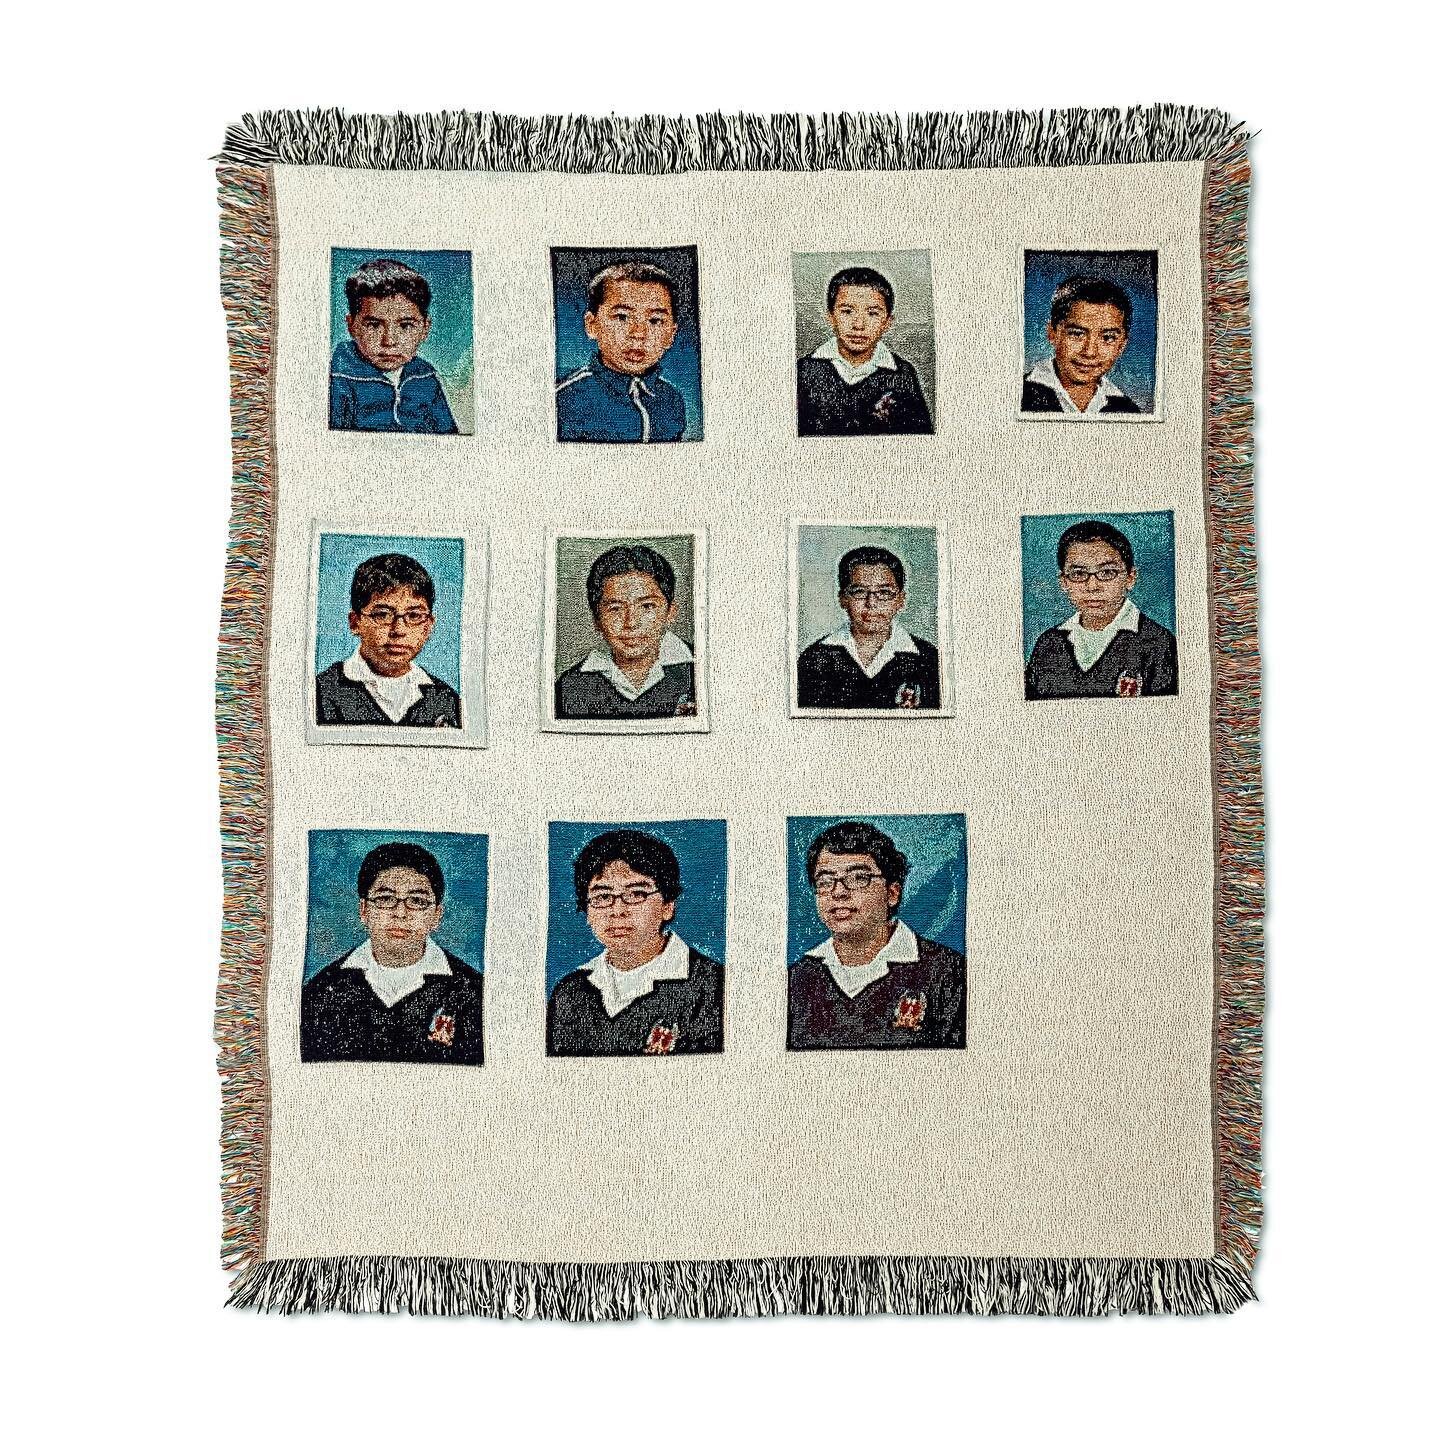 🫶🏽
My heart is overflowing to have my piece &quot;w_t_01 (fotocarnet)&quot; on view at Mindy Solomon Gallery as part of Hand Over Hand: Textiles Today. These school portraits, taken during elementary school, middle school, and high school, are more